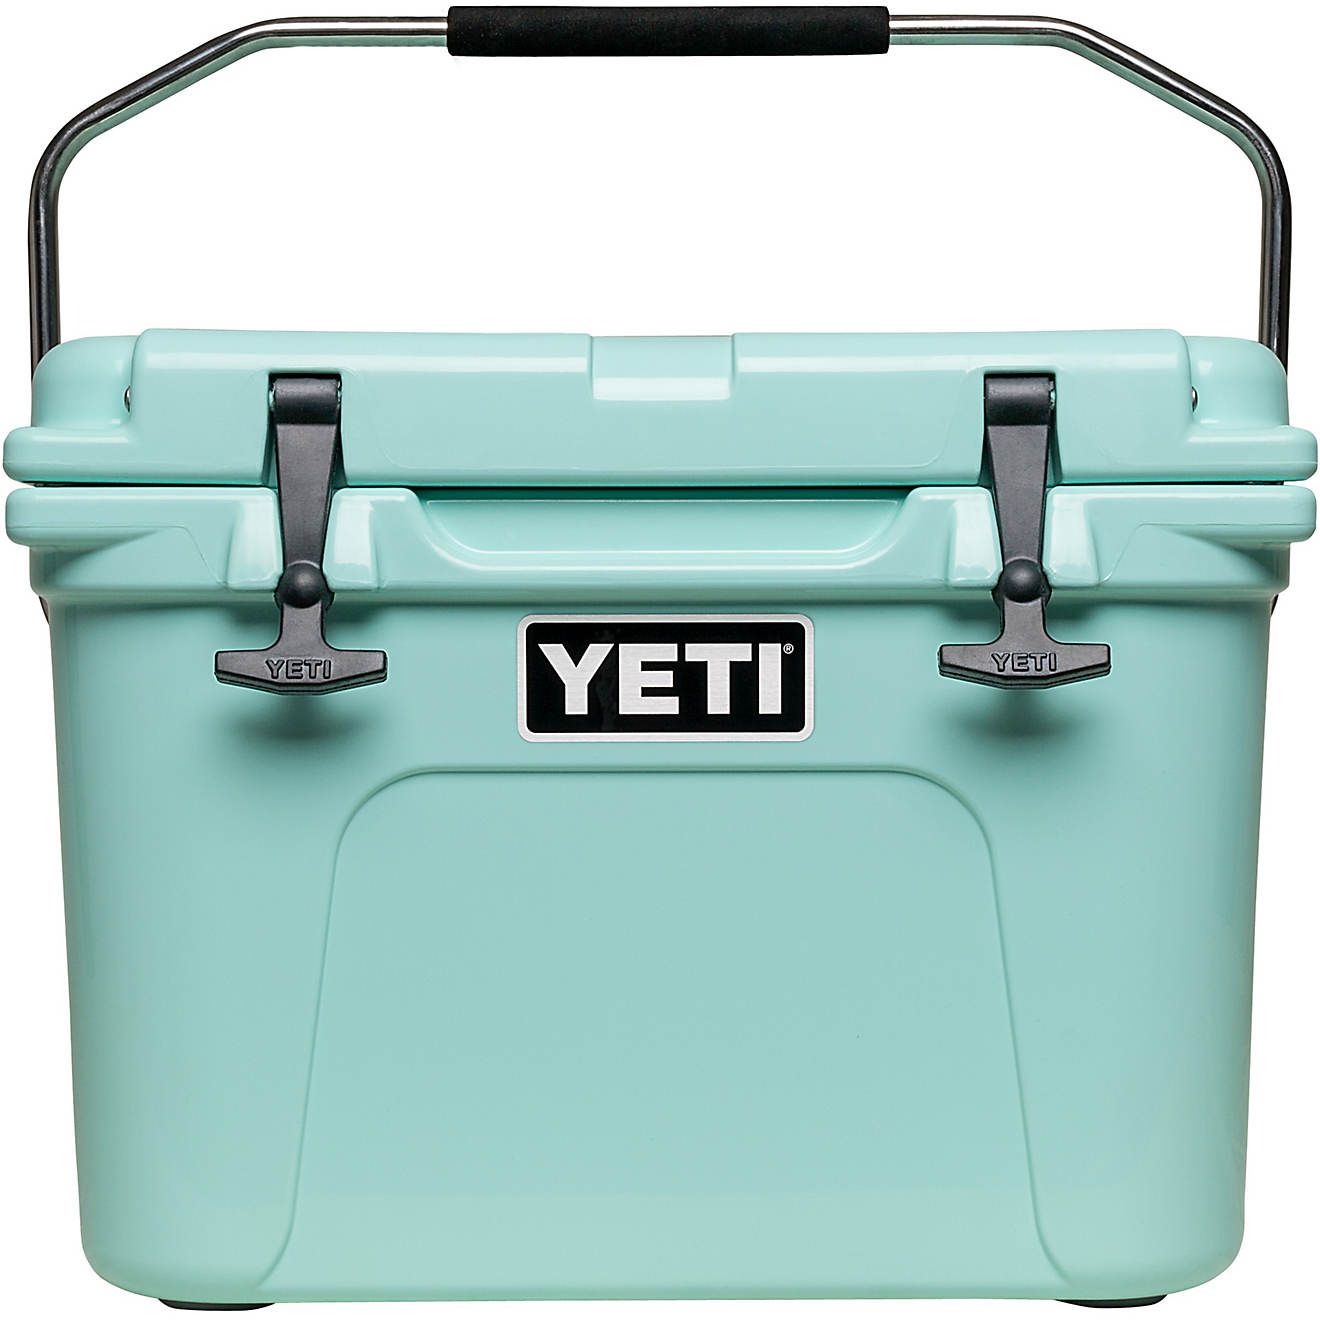 YETI Roadie 20 Cooler | Academy Sports + Outdoor Affiliate